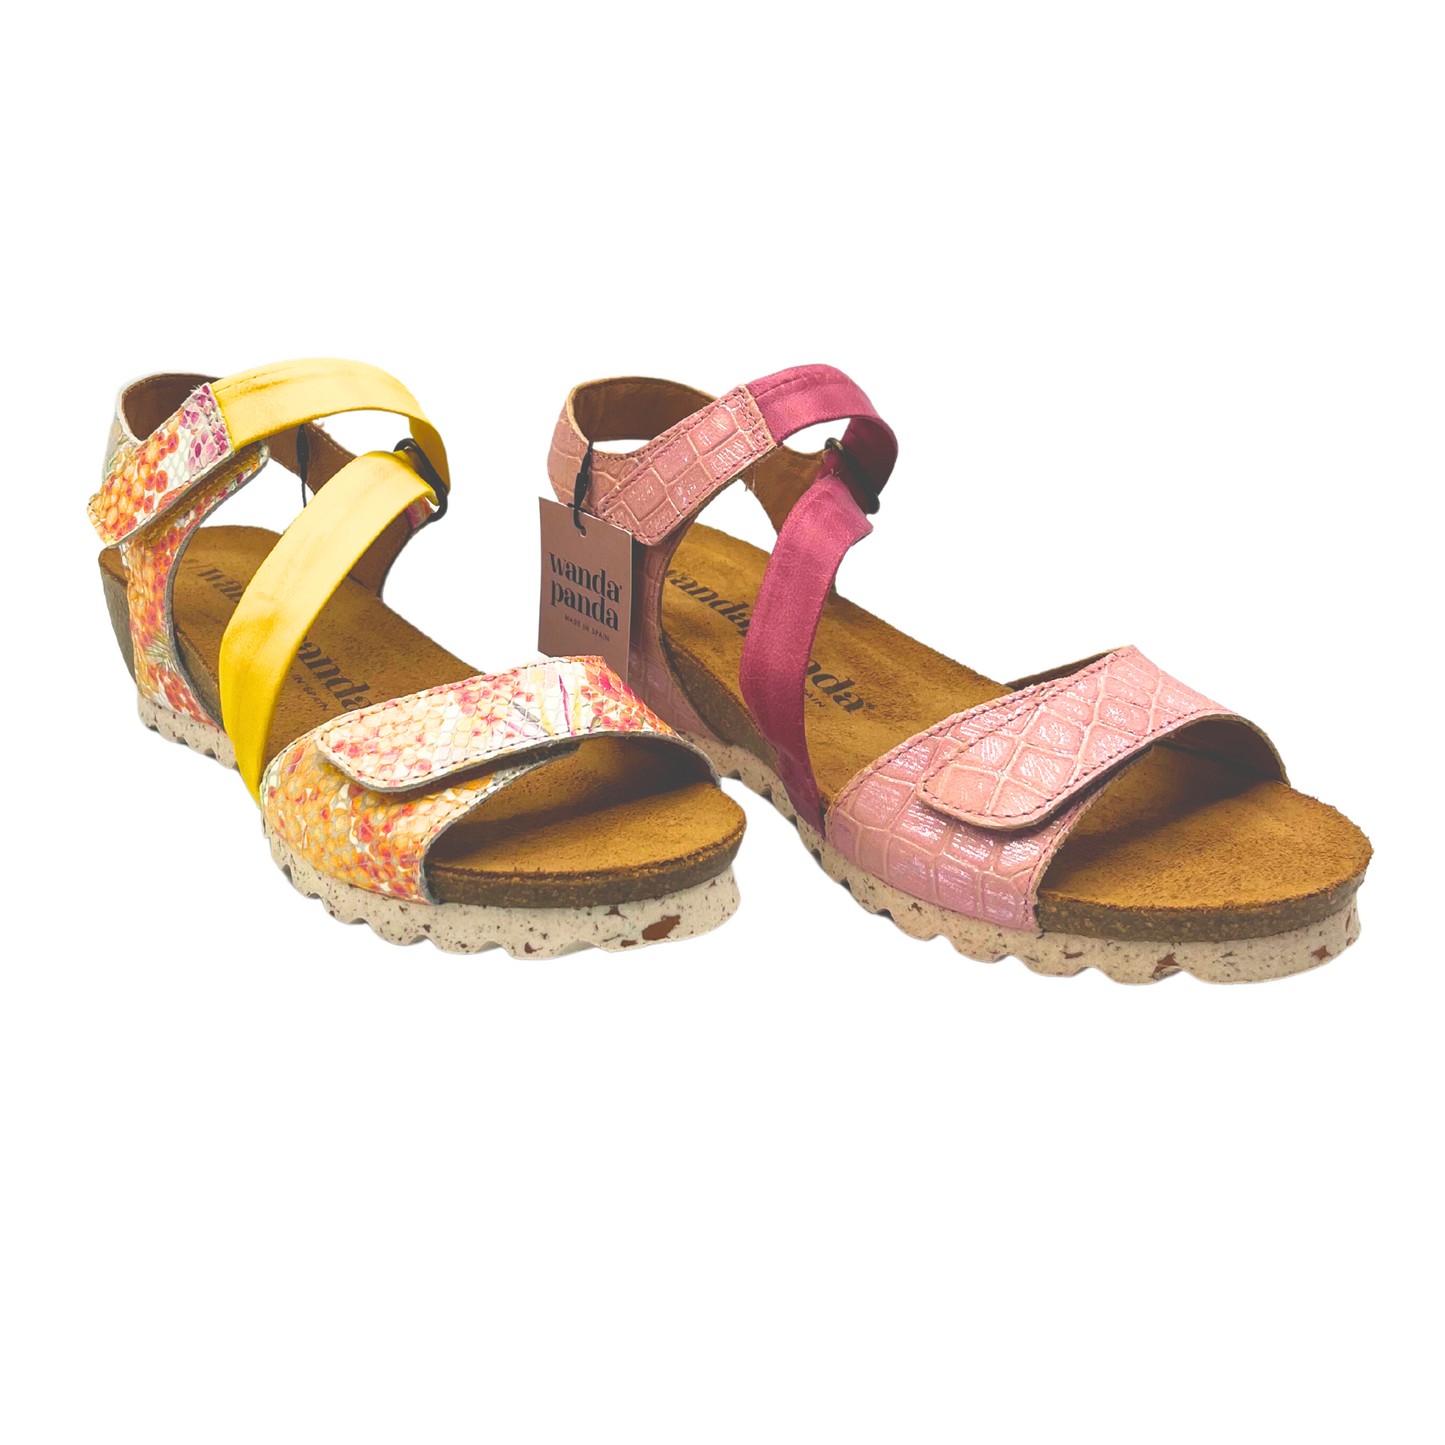 Angled front view of a colorful sandal shown in both a yellow and pink colorway